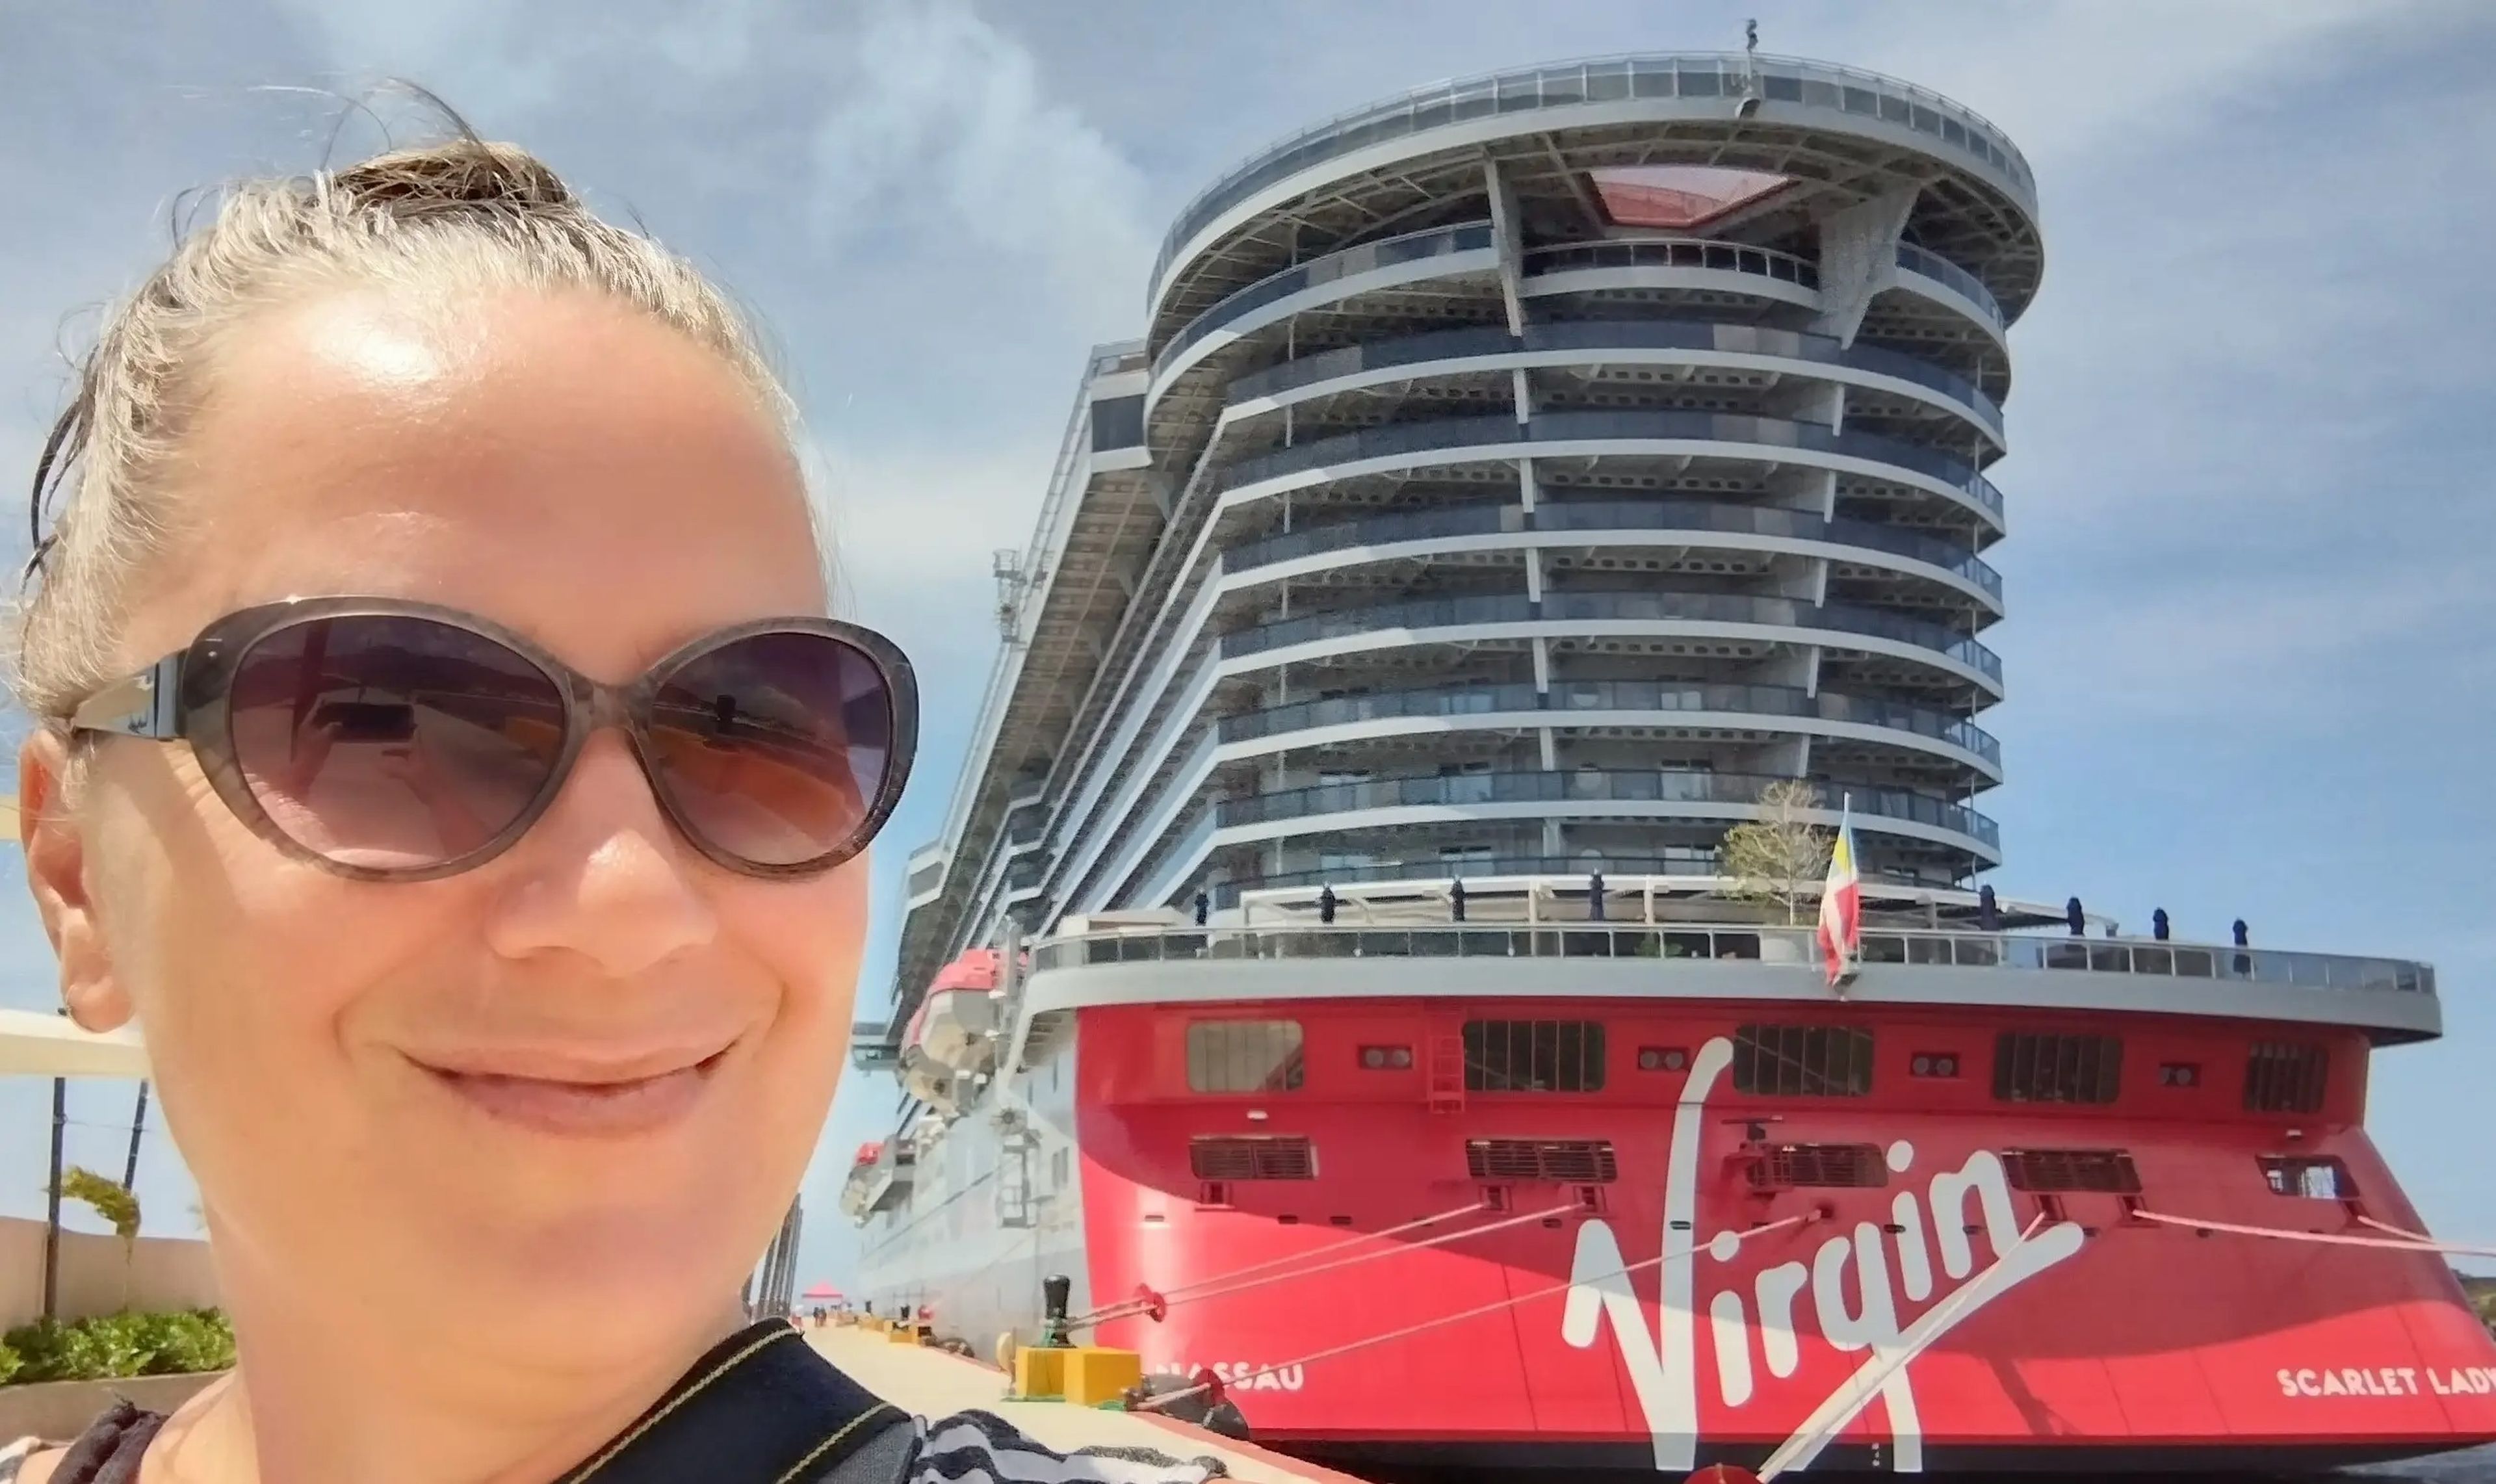 A woman takes a selfie in front of a Virgin cruise ship.